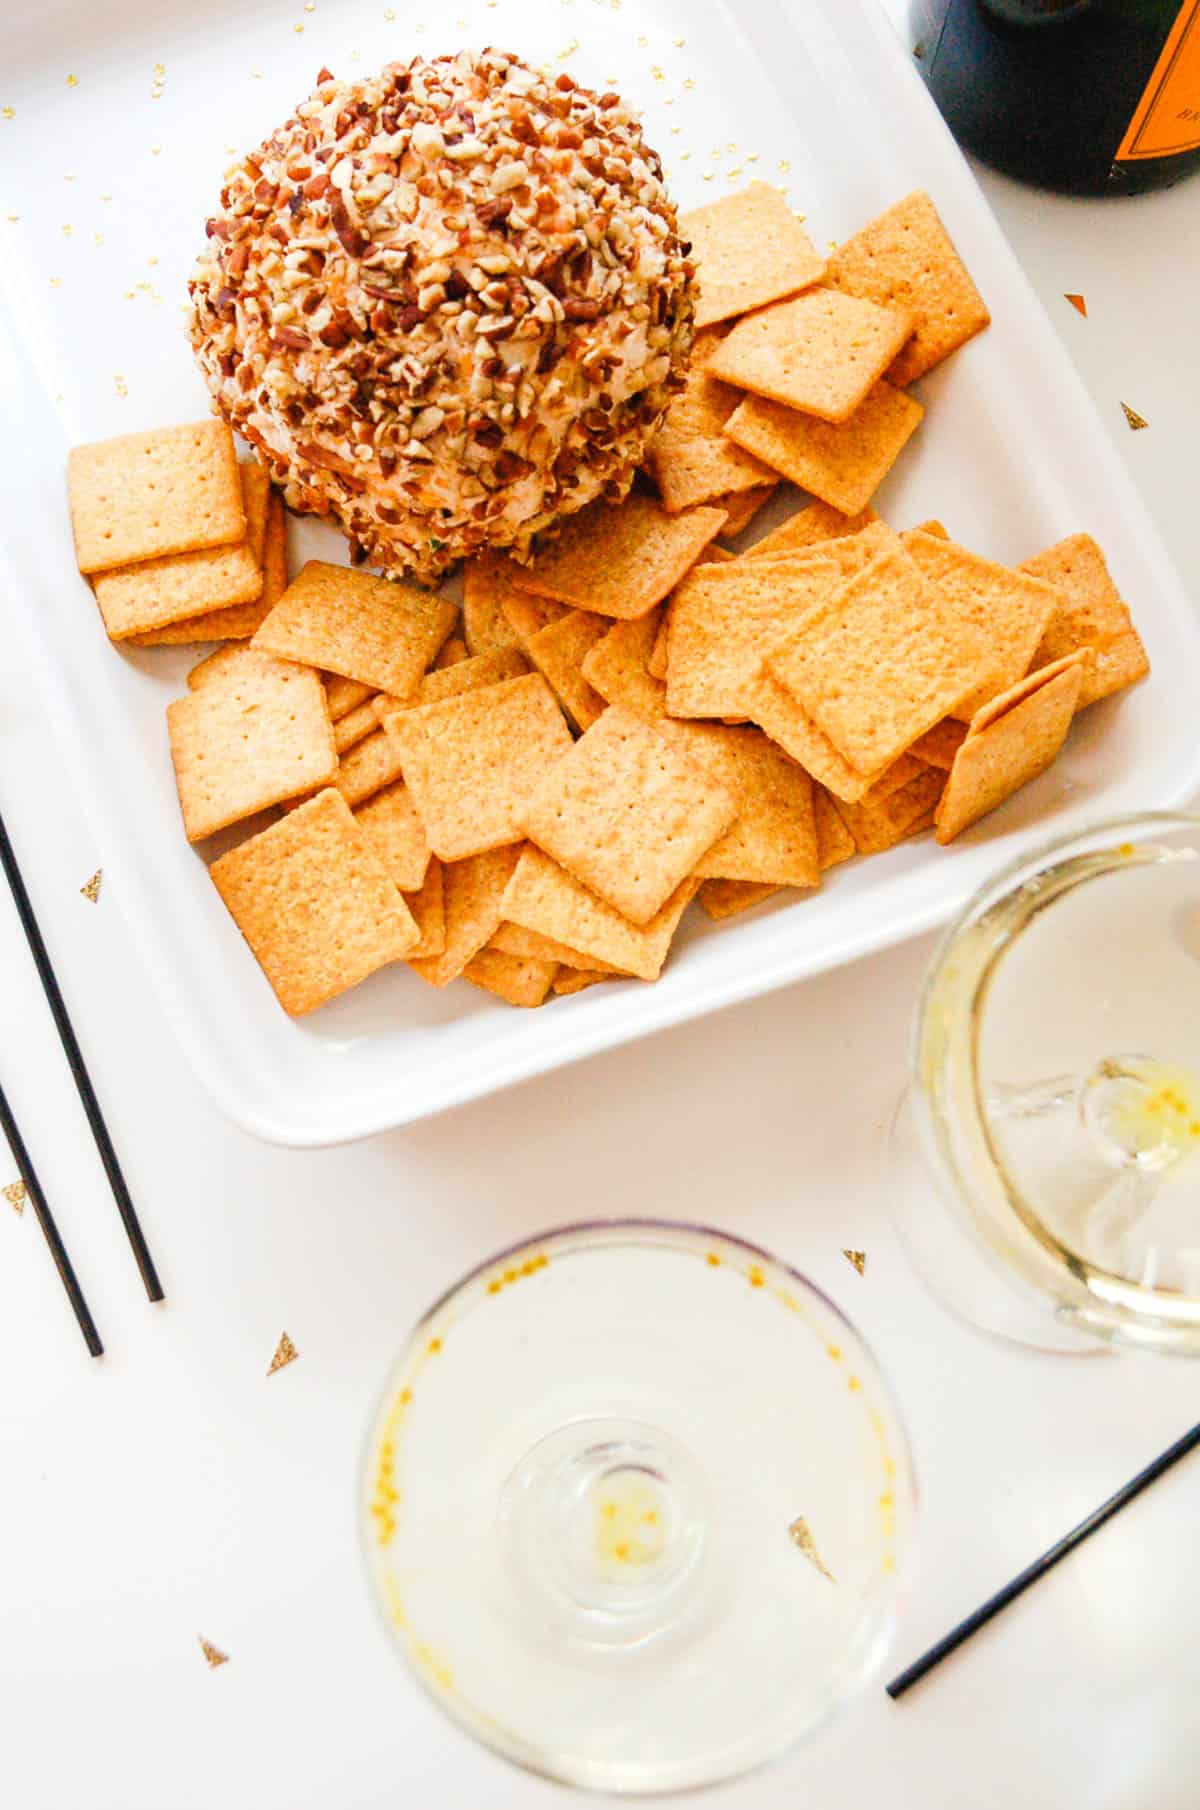 A cheese ball rolled in pecans and served with crackers on a white platter next to glasses of champagne.